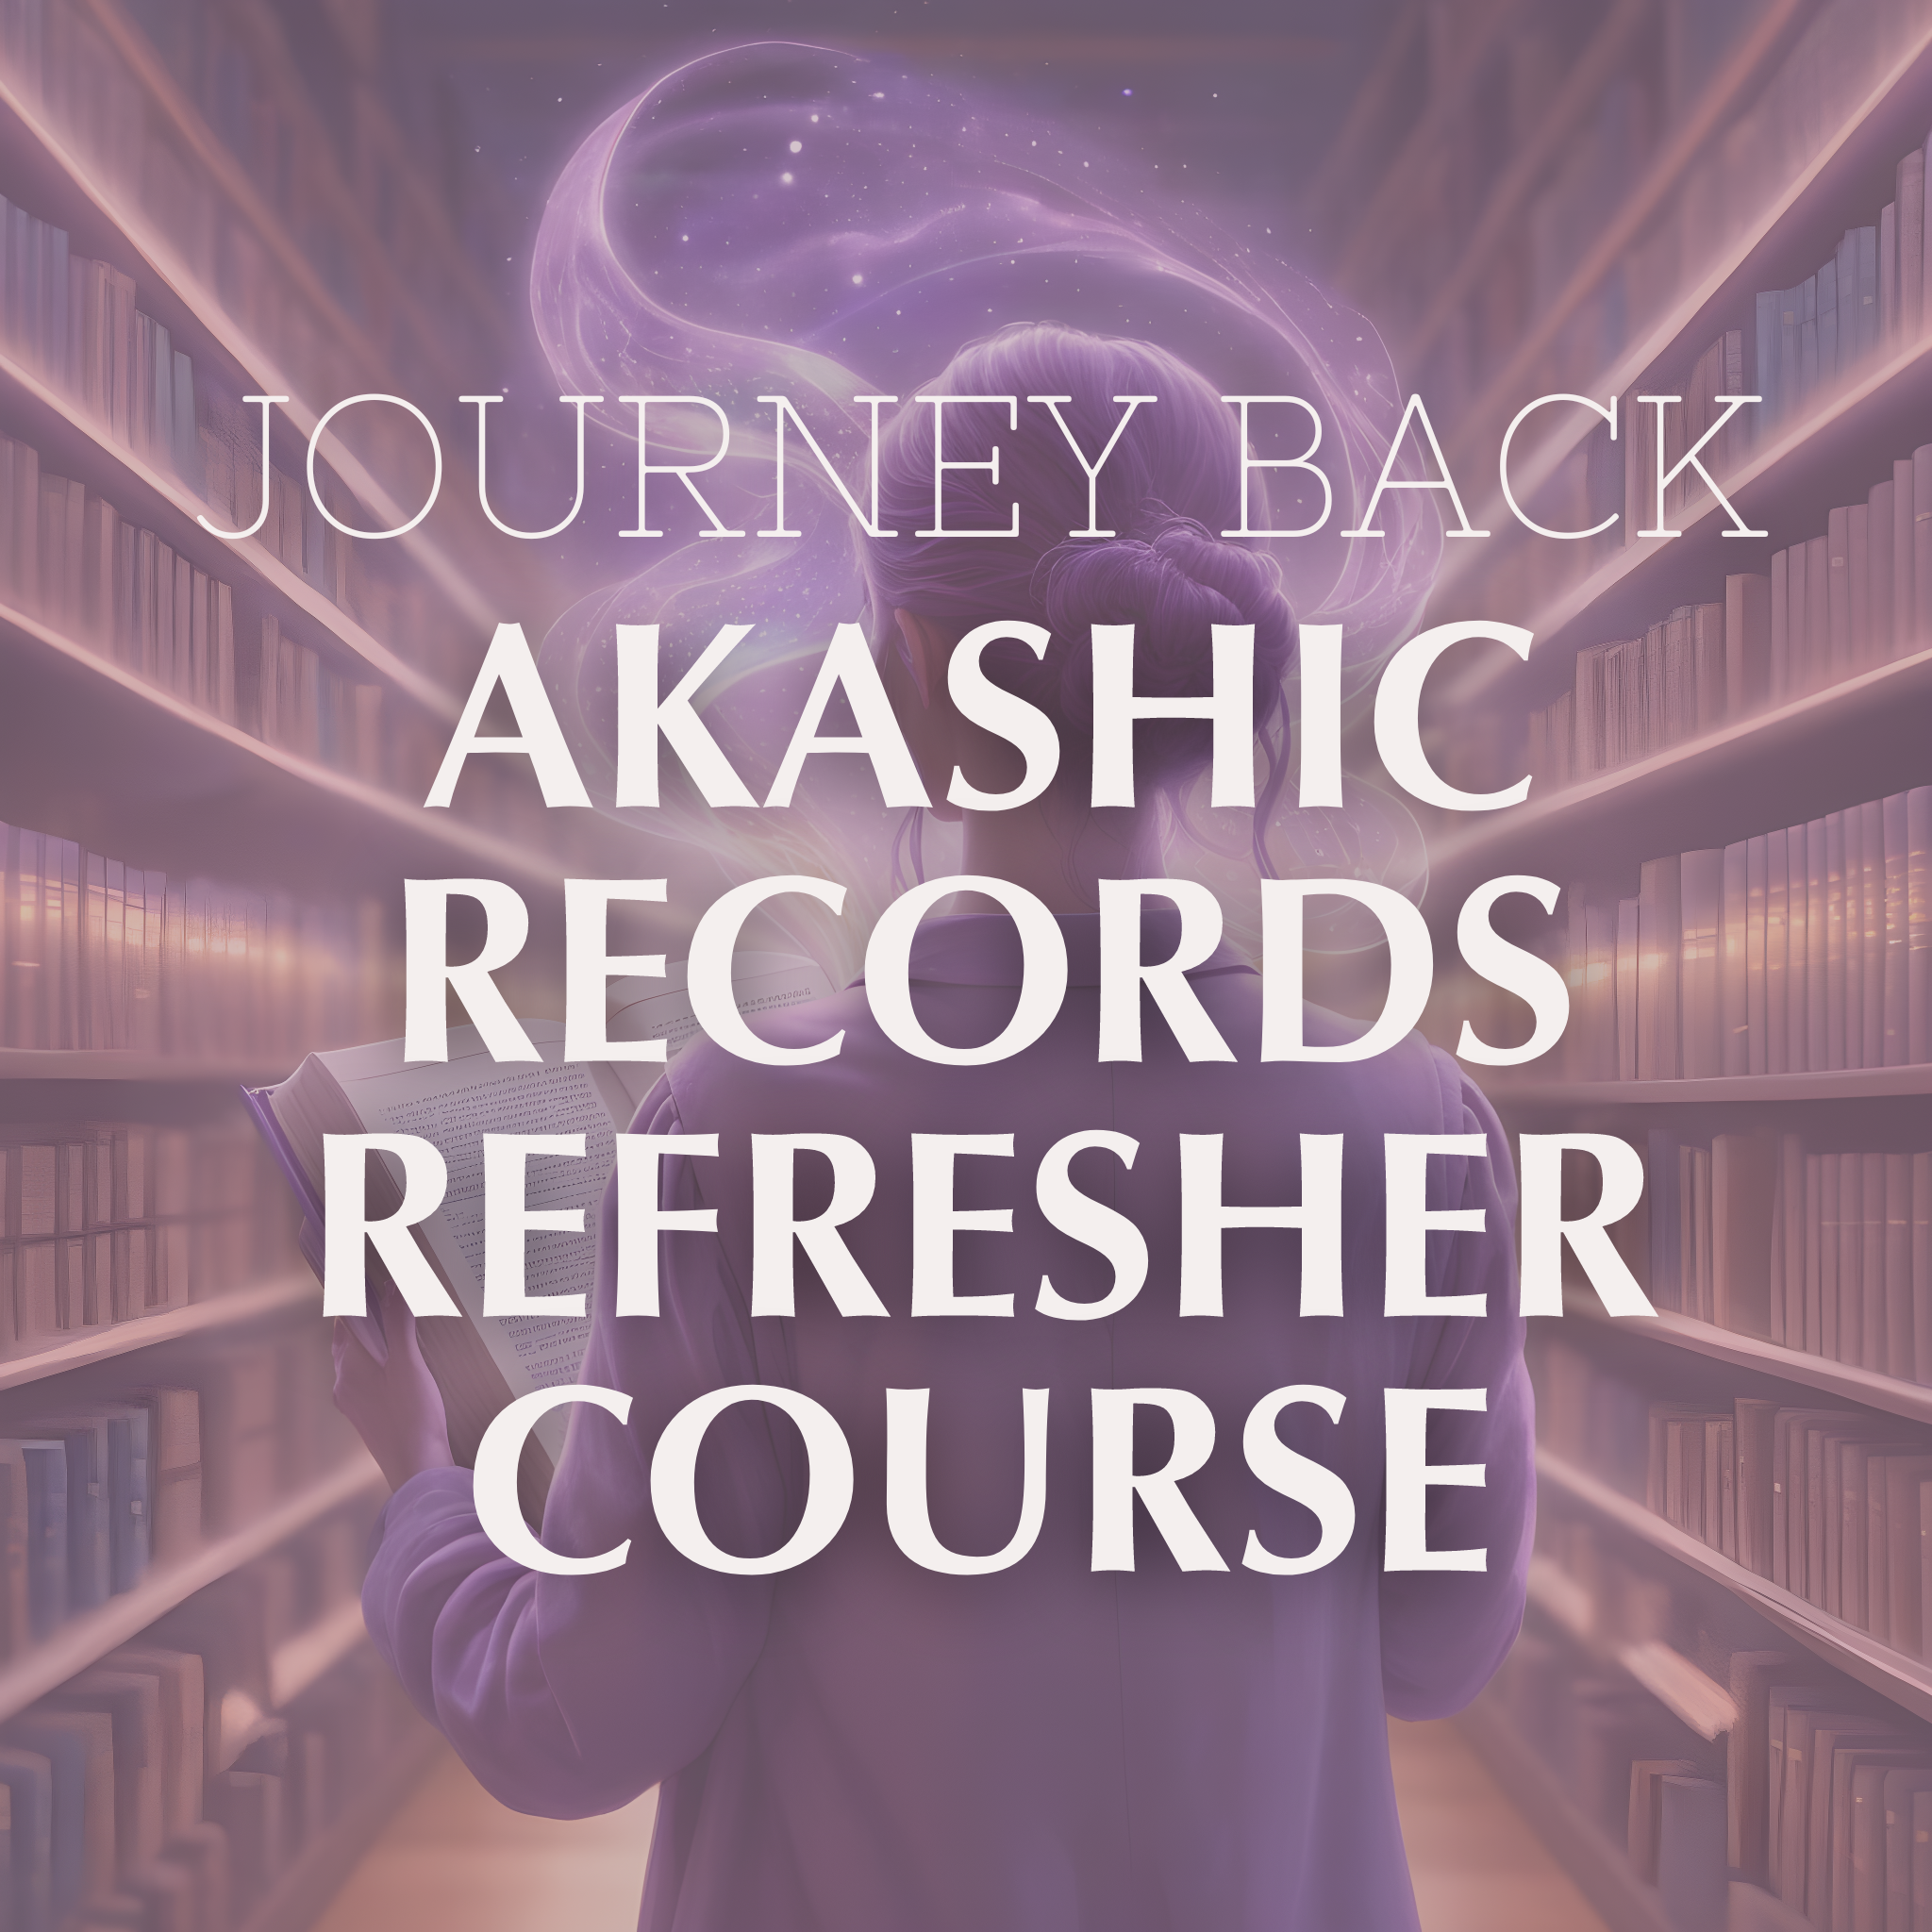 Akashic Records Refresher Course